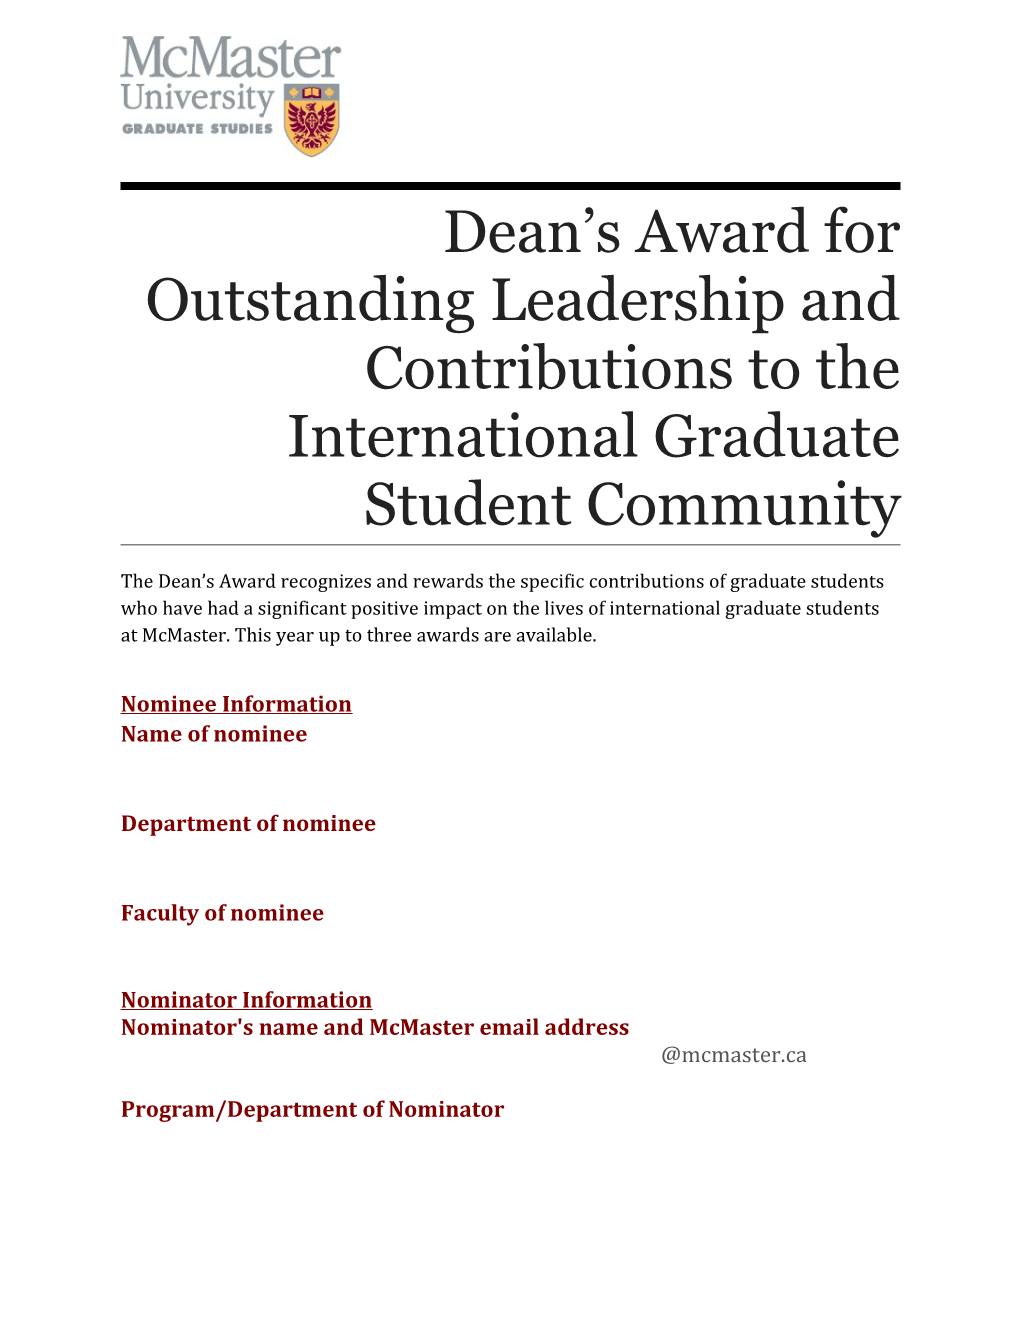 Dean S Award for Outstanding Leadership and Contributions to the International Graduate